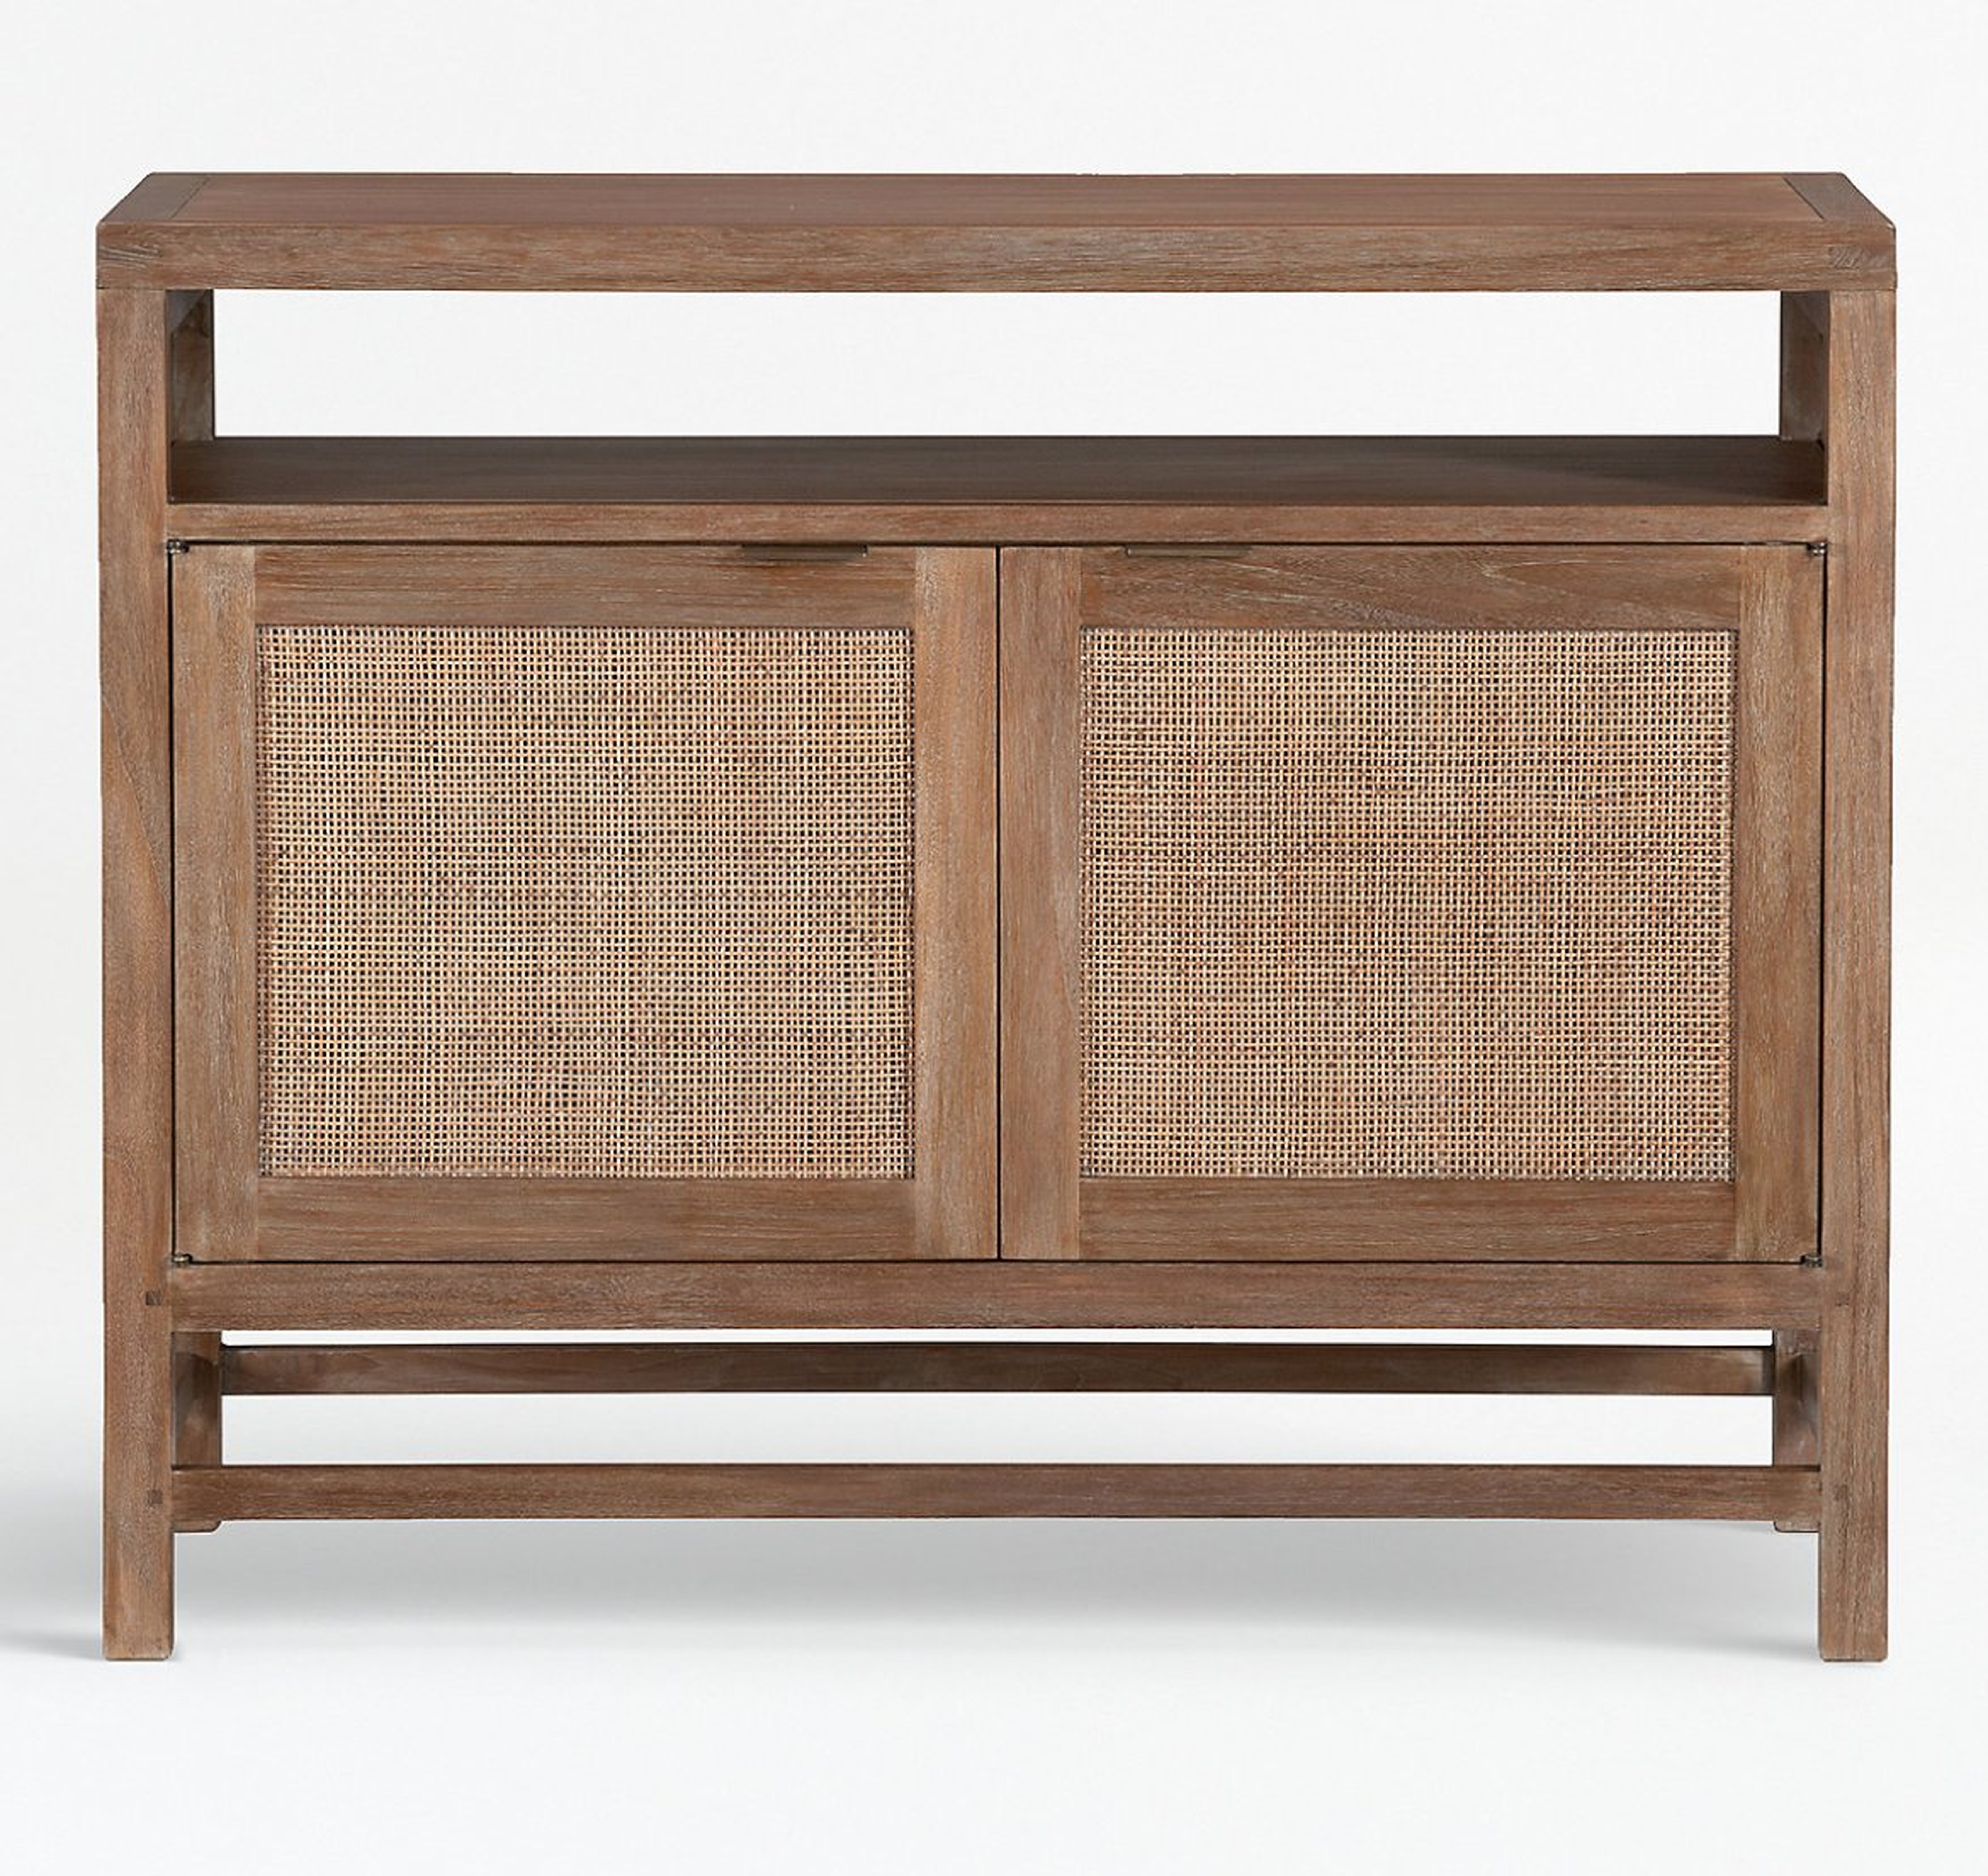 Blake 42" Light Brown Teak and Rattan Storage Media Console - Crate and Barrel